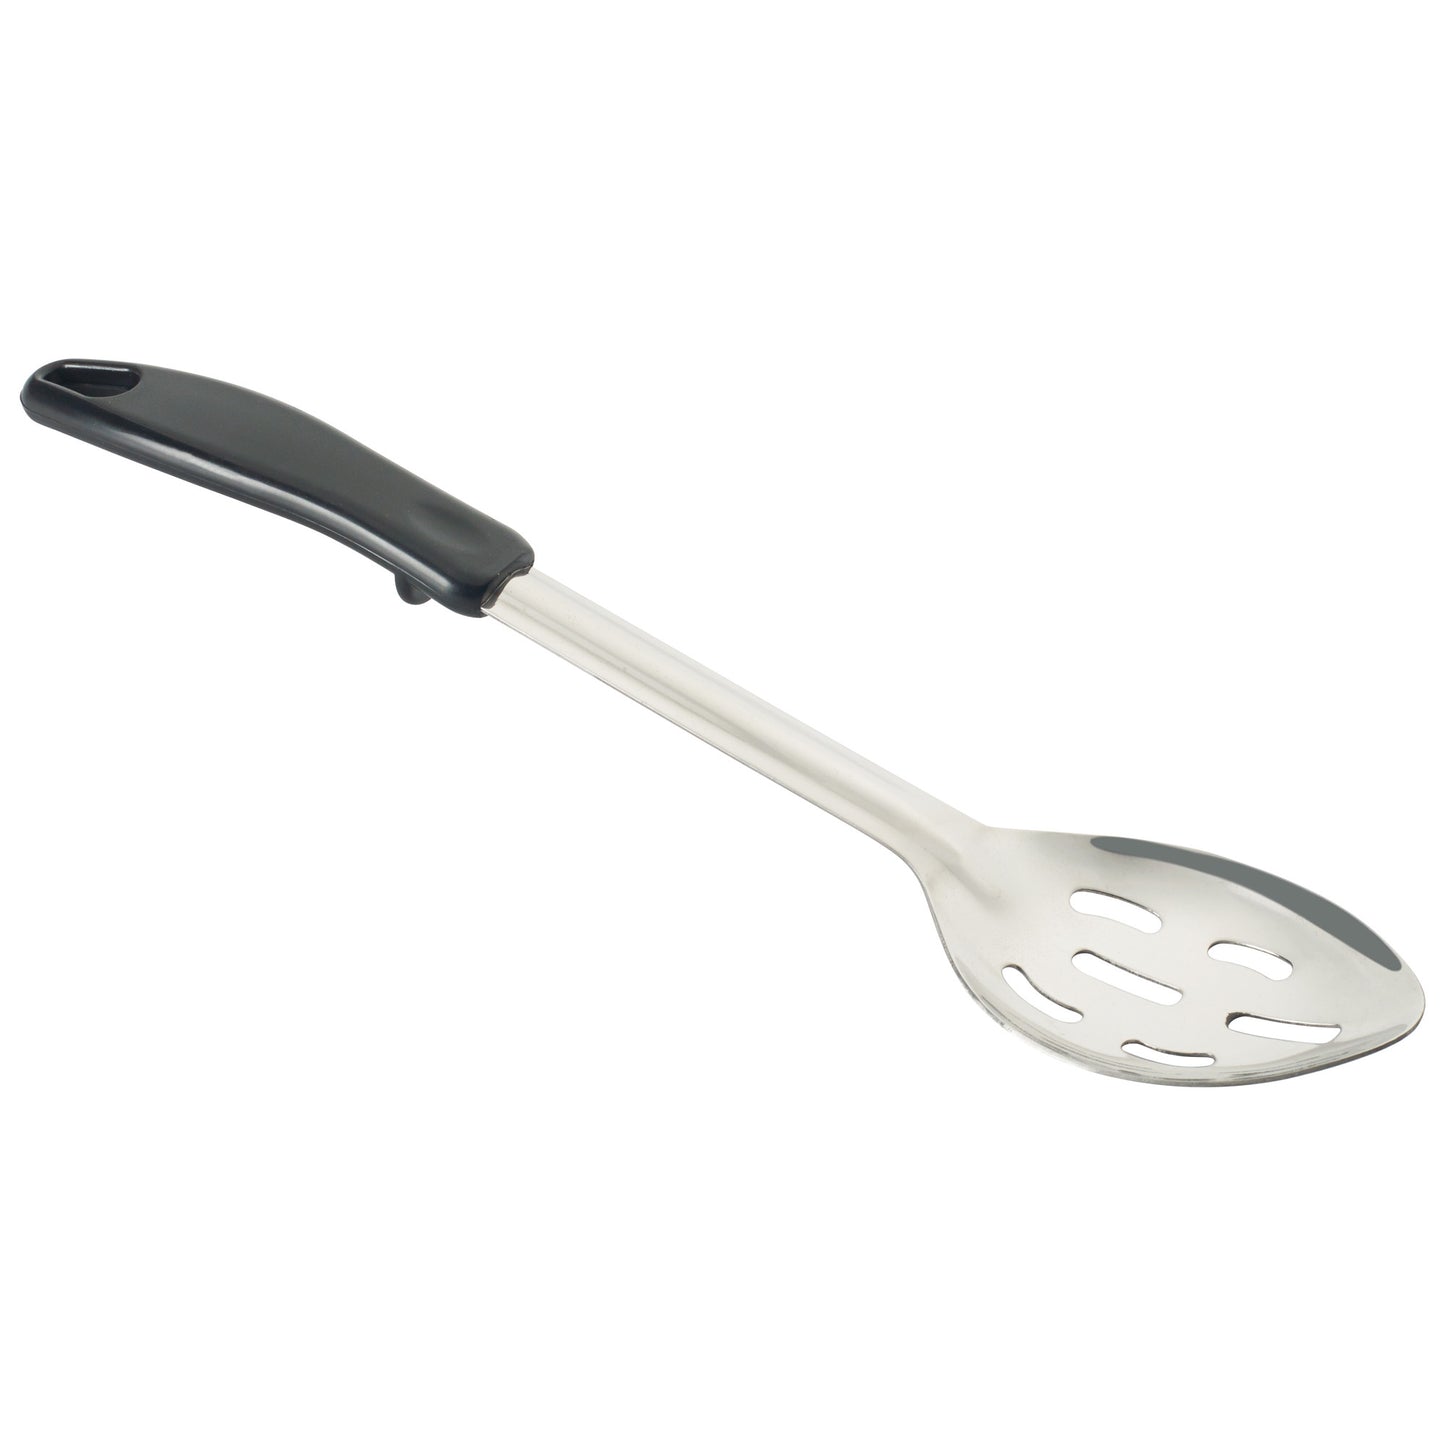 BHSP-13 - Basting Spoon with Stop-Hook Polypropylene Handle - Slotted, 13"